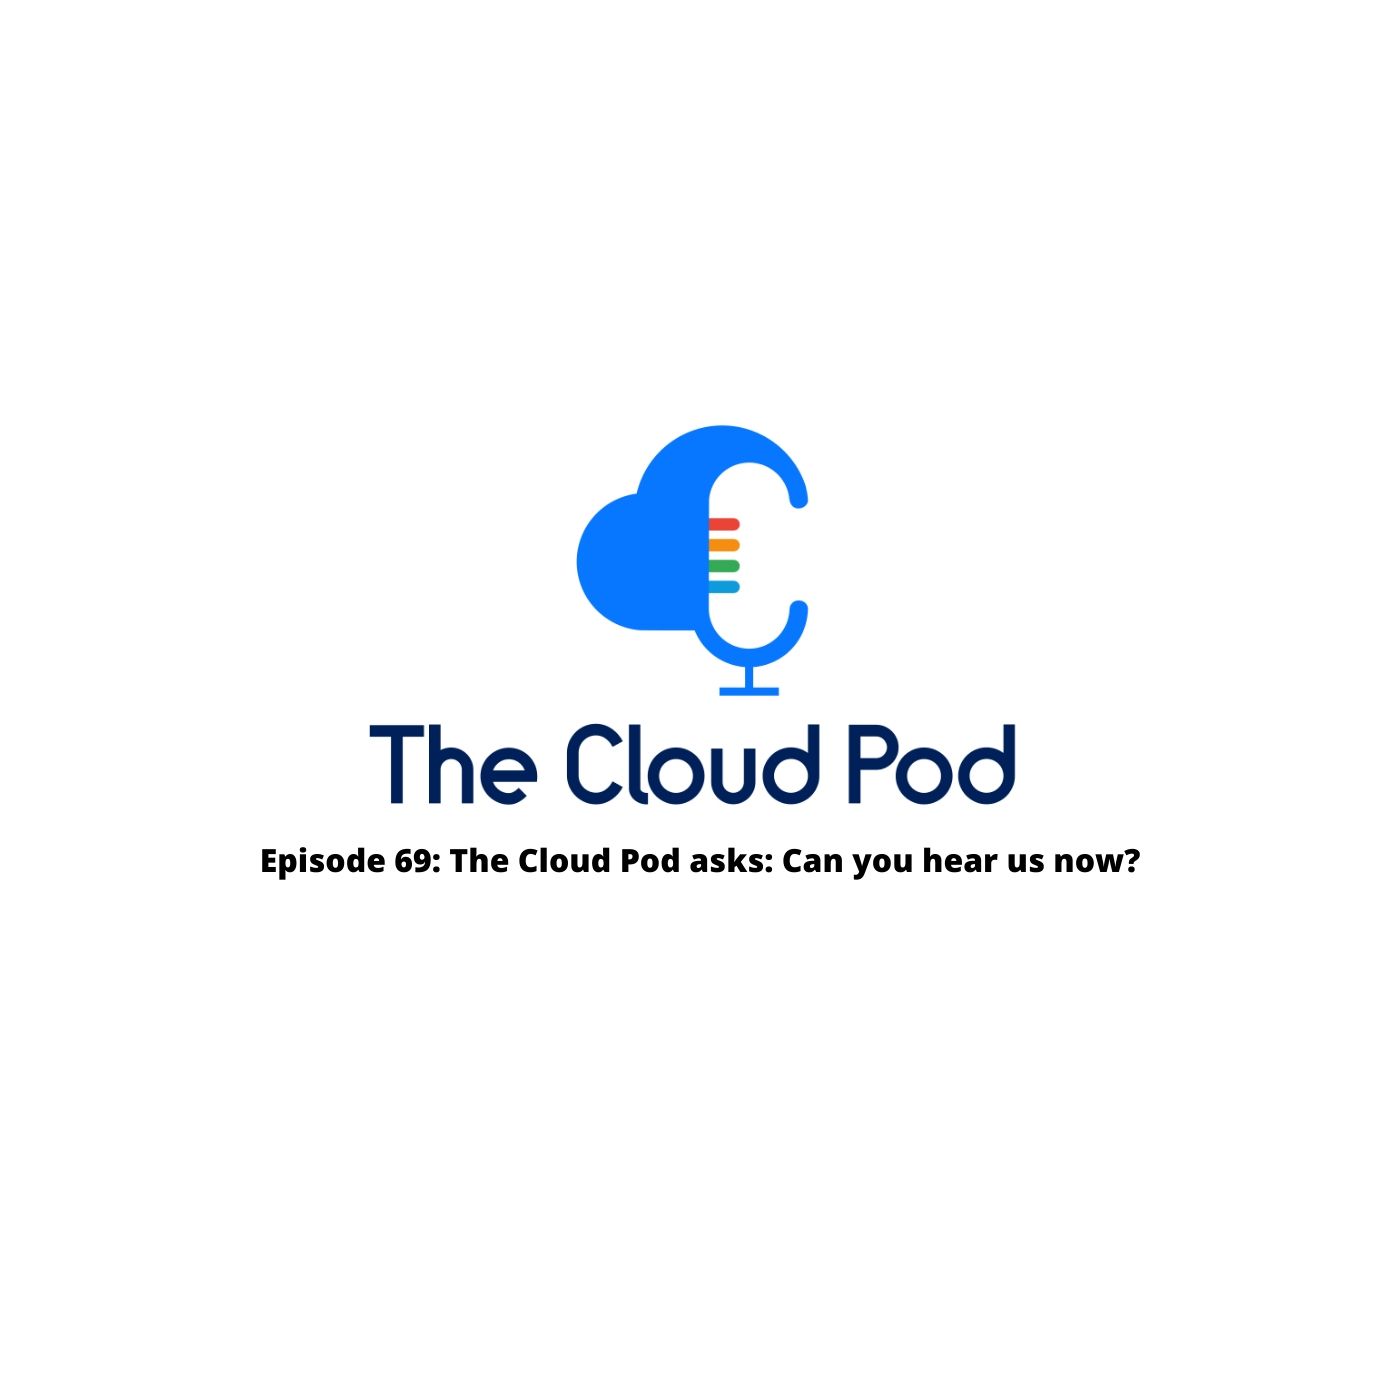 69 - The Cloud Pod asks: Can you hear us now?